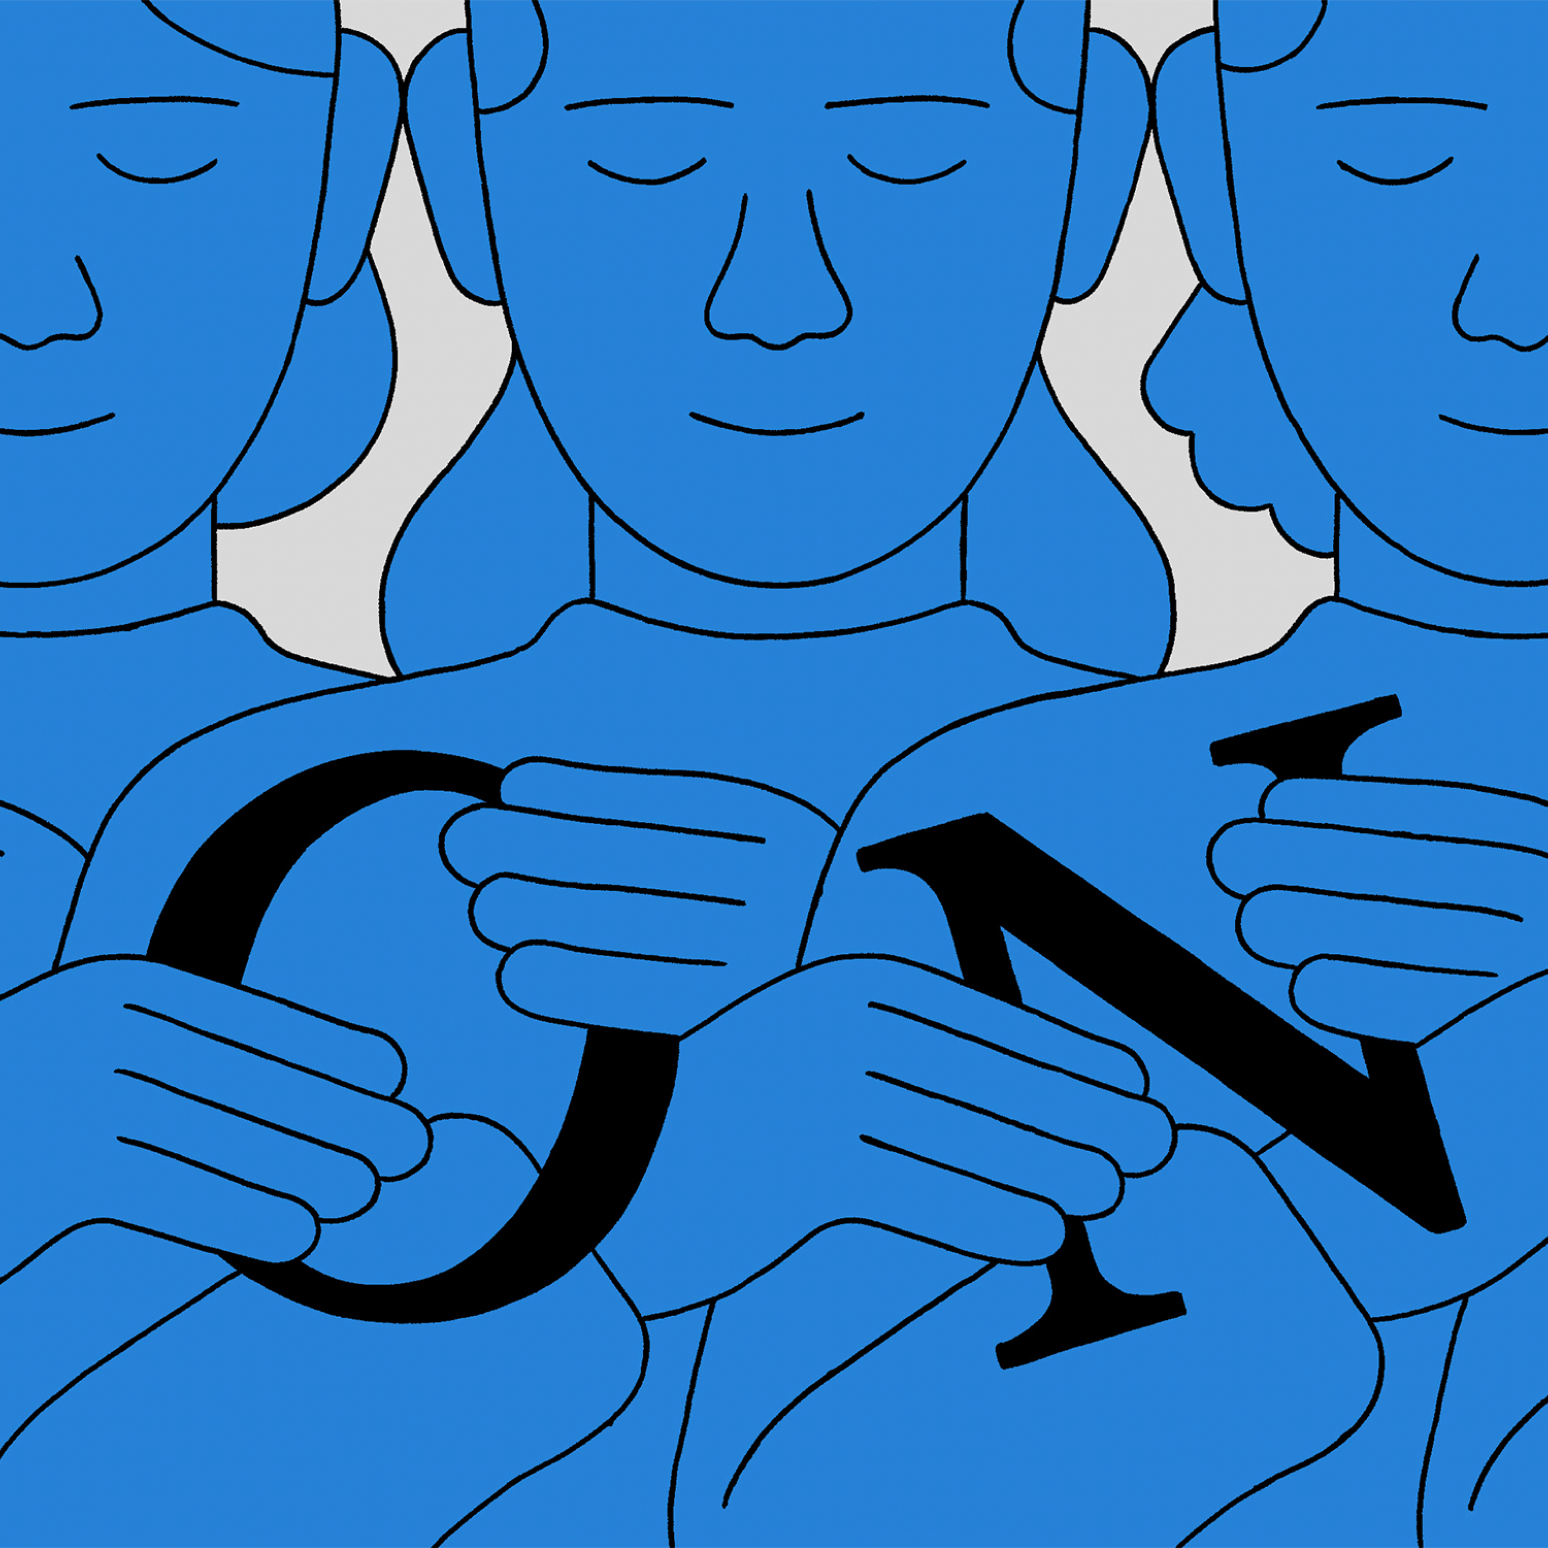 An illustration of people holding letters